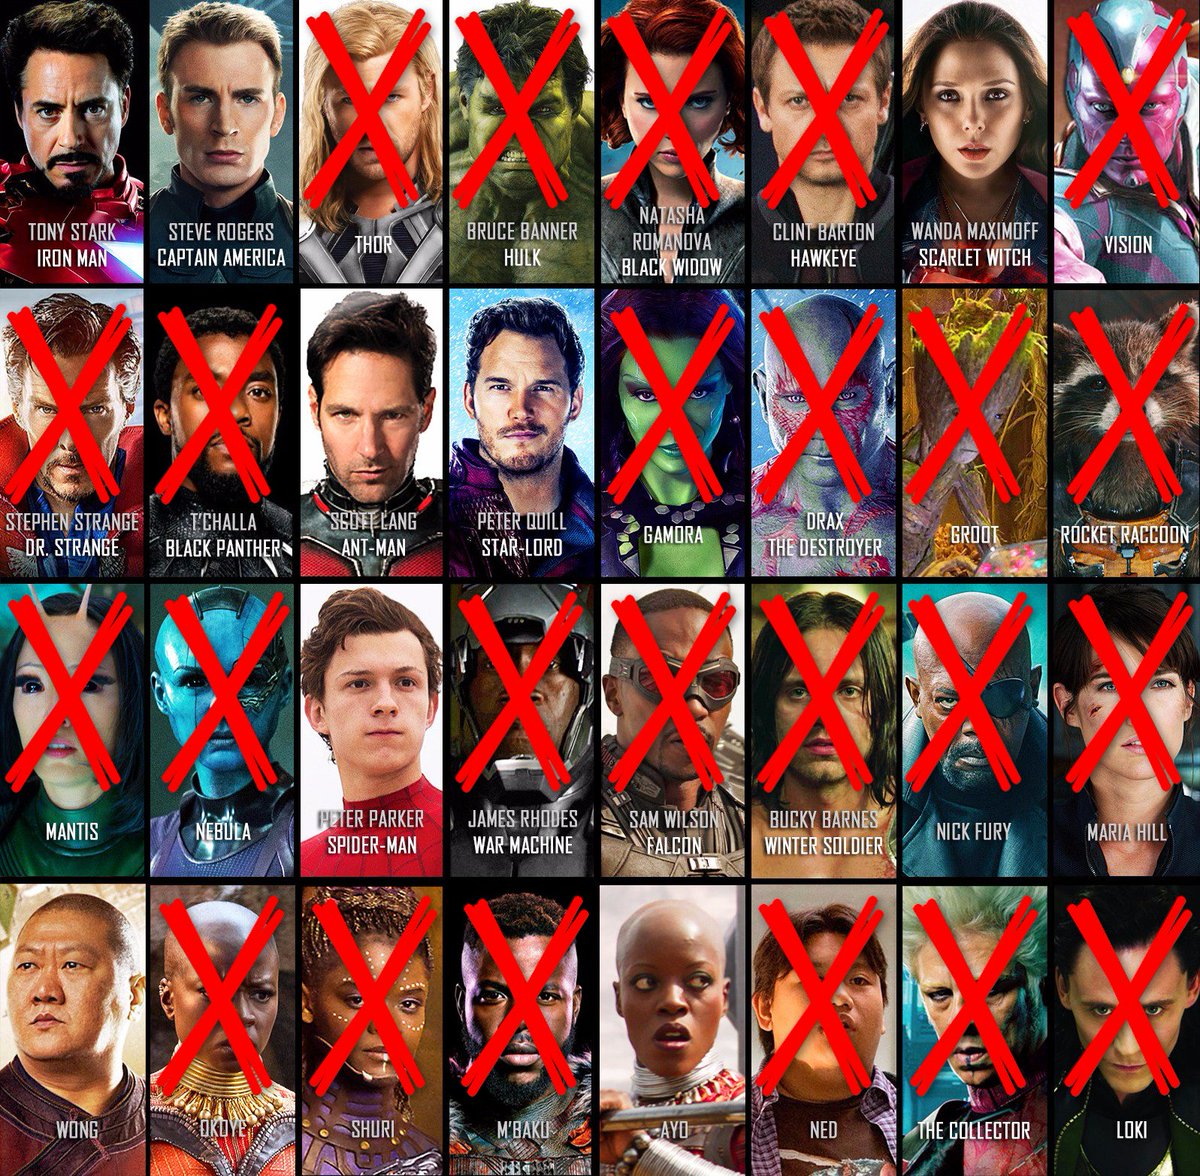 That's the end of Round Two! Here are the current standings. Place your bets! #AvengersAlgorithmWar